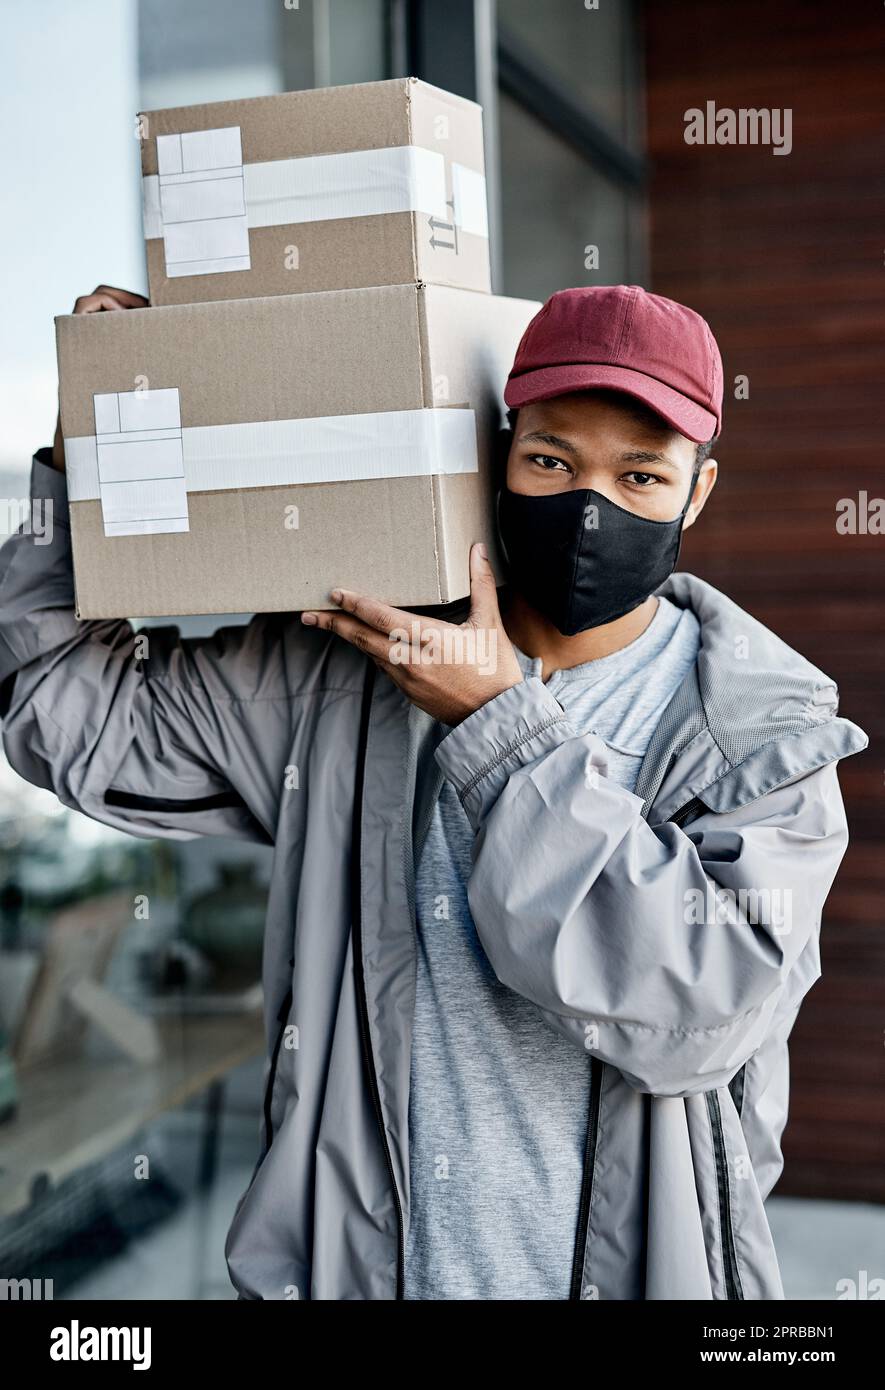 Keeping customers happy at a safe distance. a masked young man delivering a package to a place of residence. Stock Photo